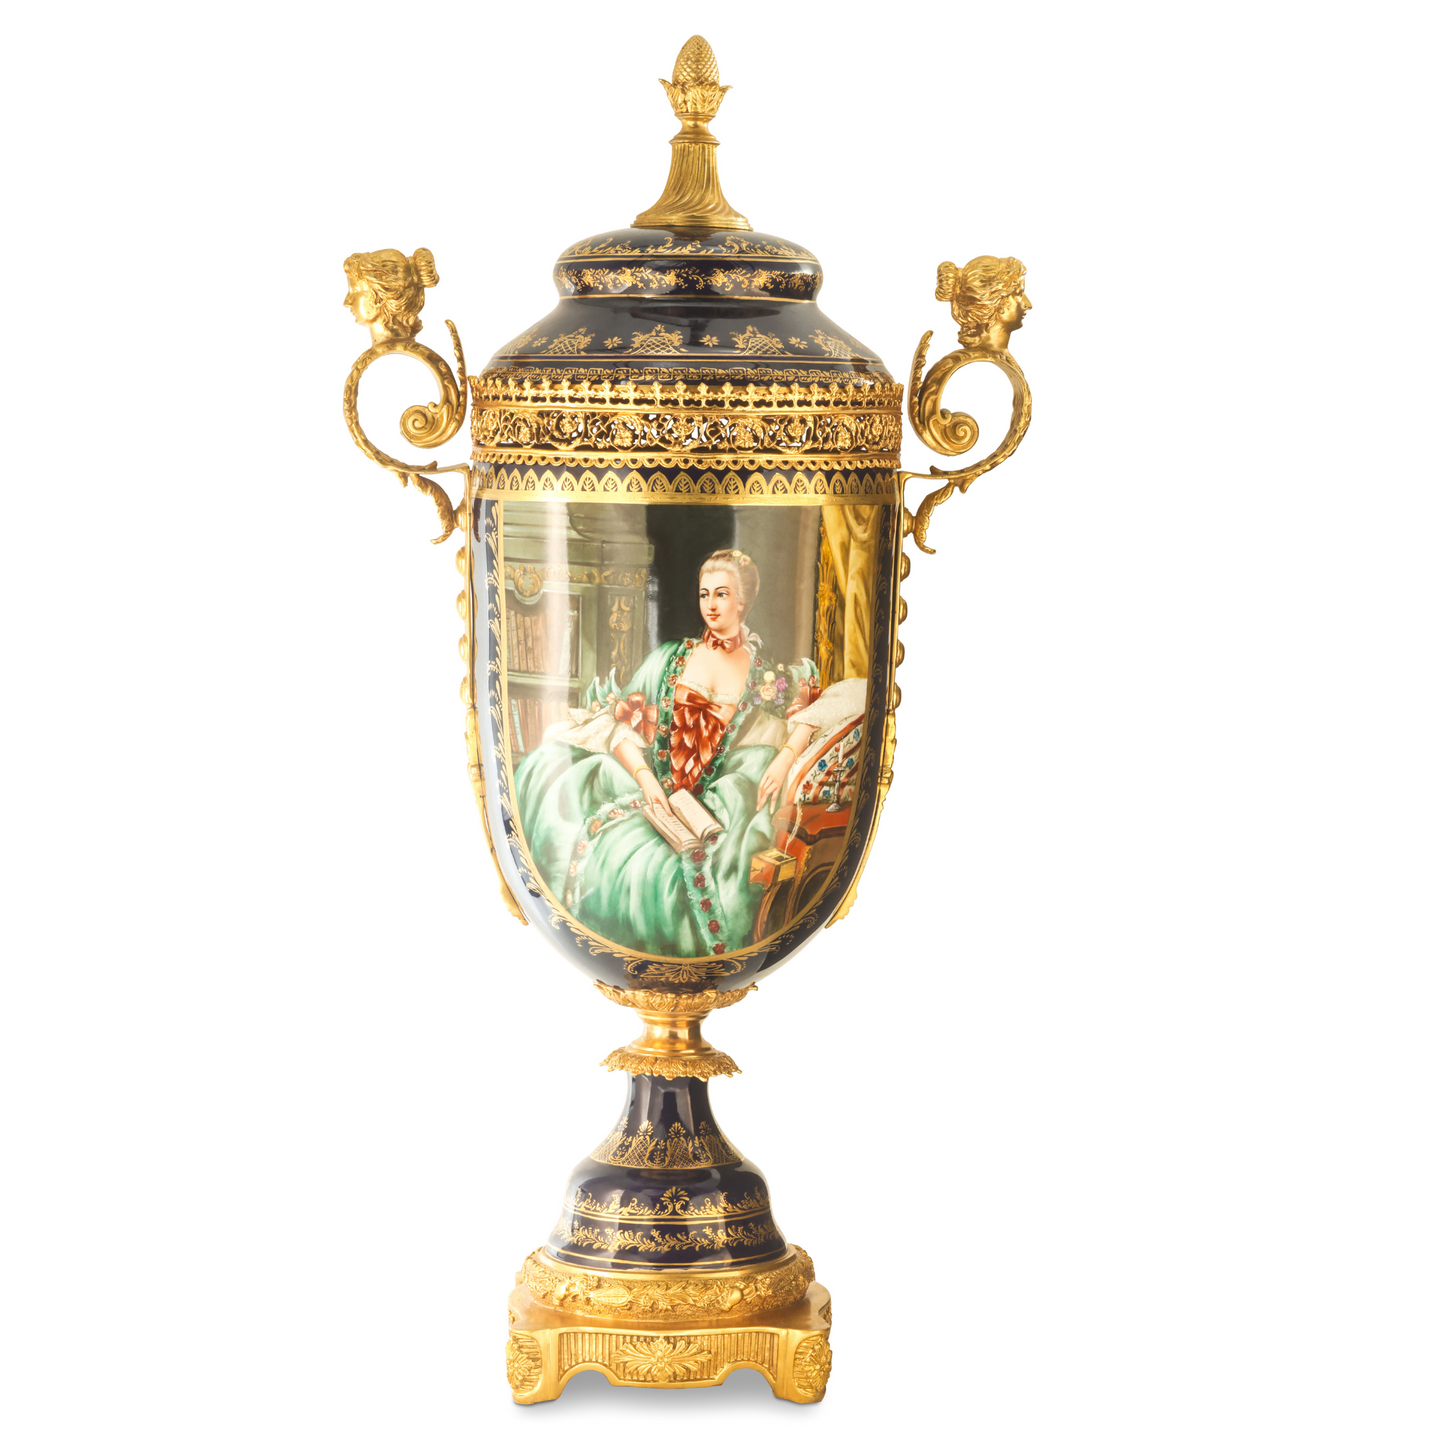 Potpourri Hand-painted Porcelain And Bronze Urn